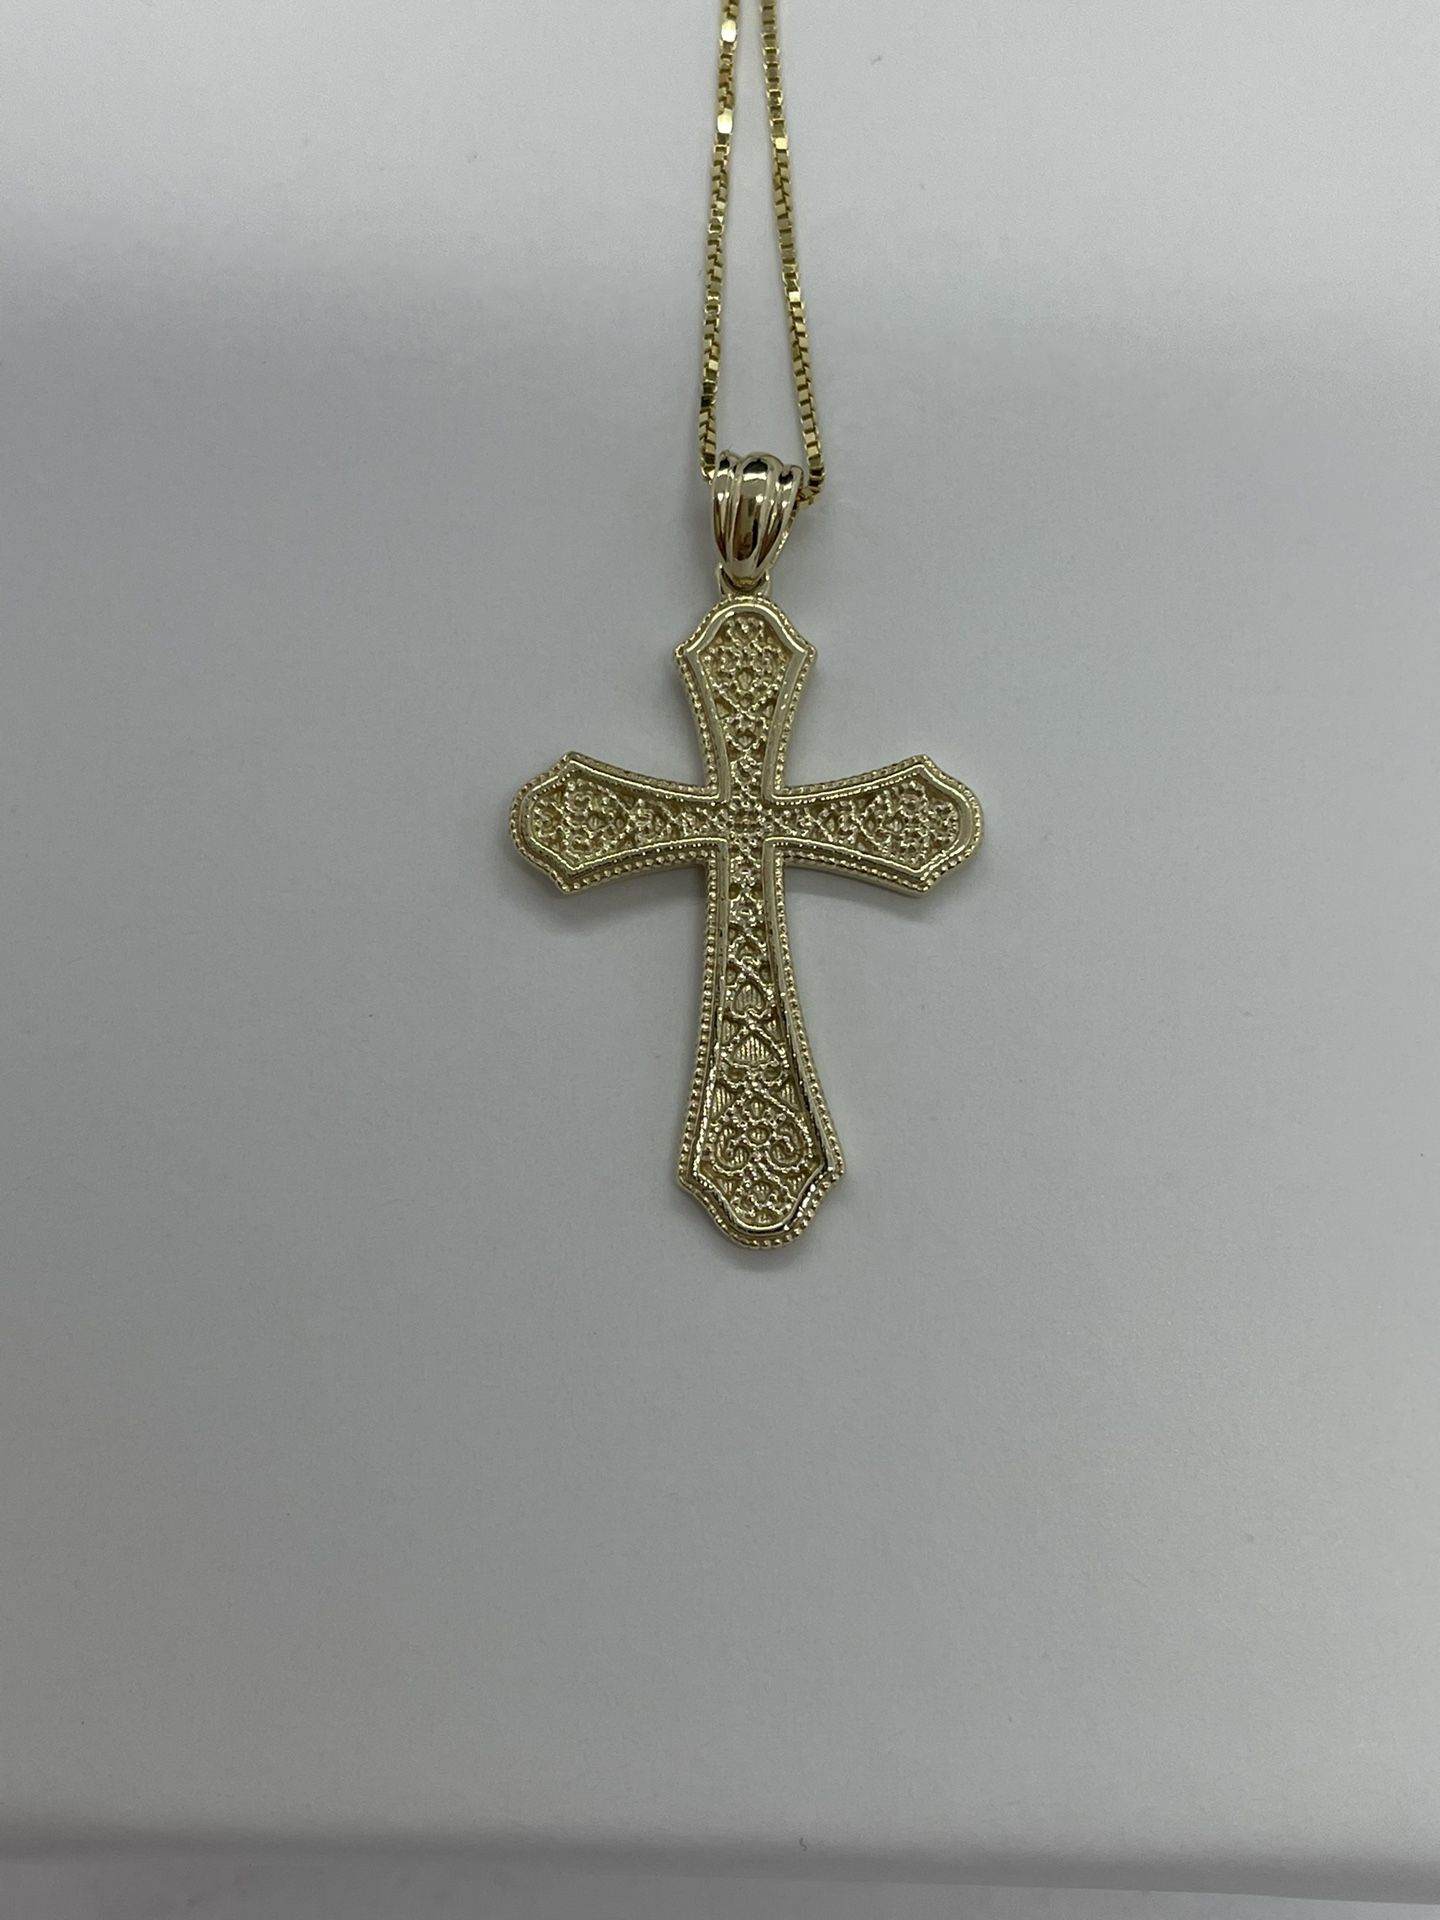 14k Gold Cross Pendant with Box Chain.New